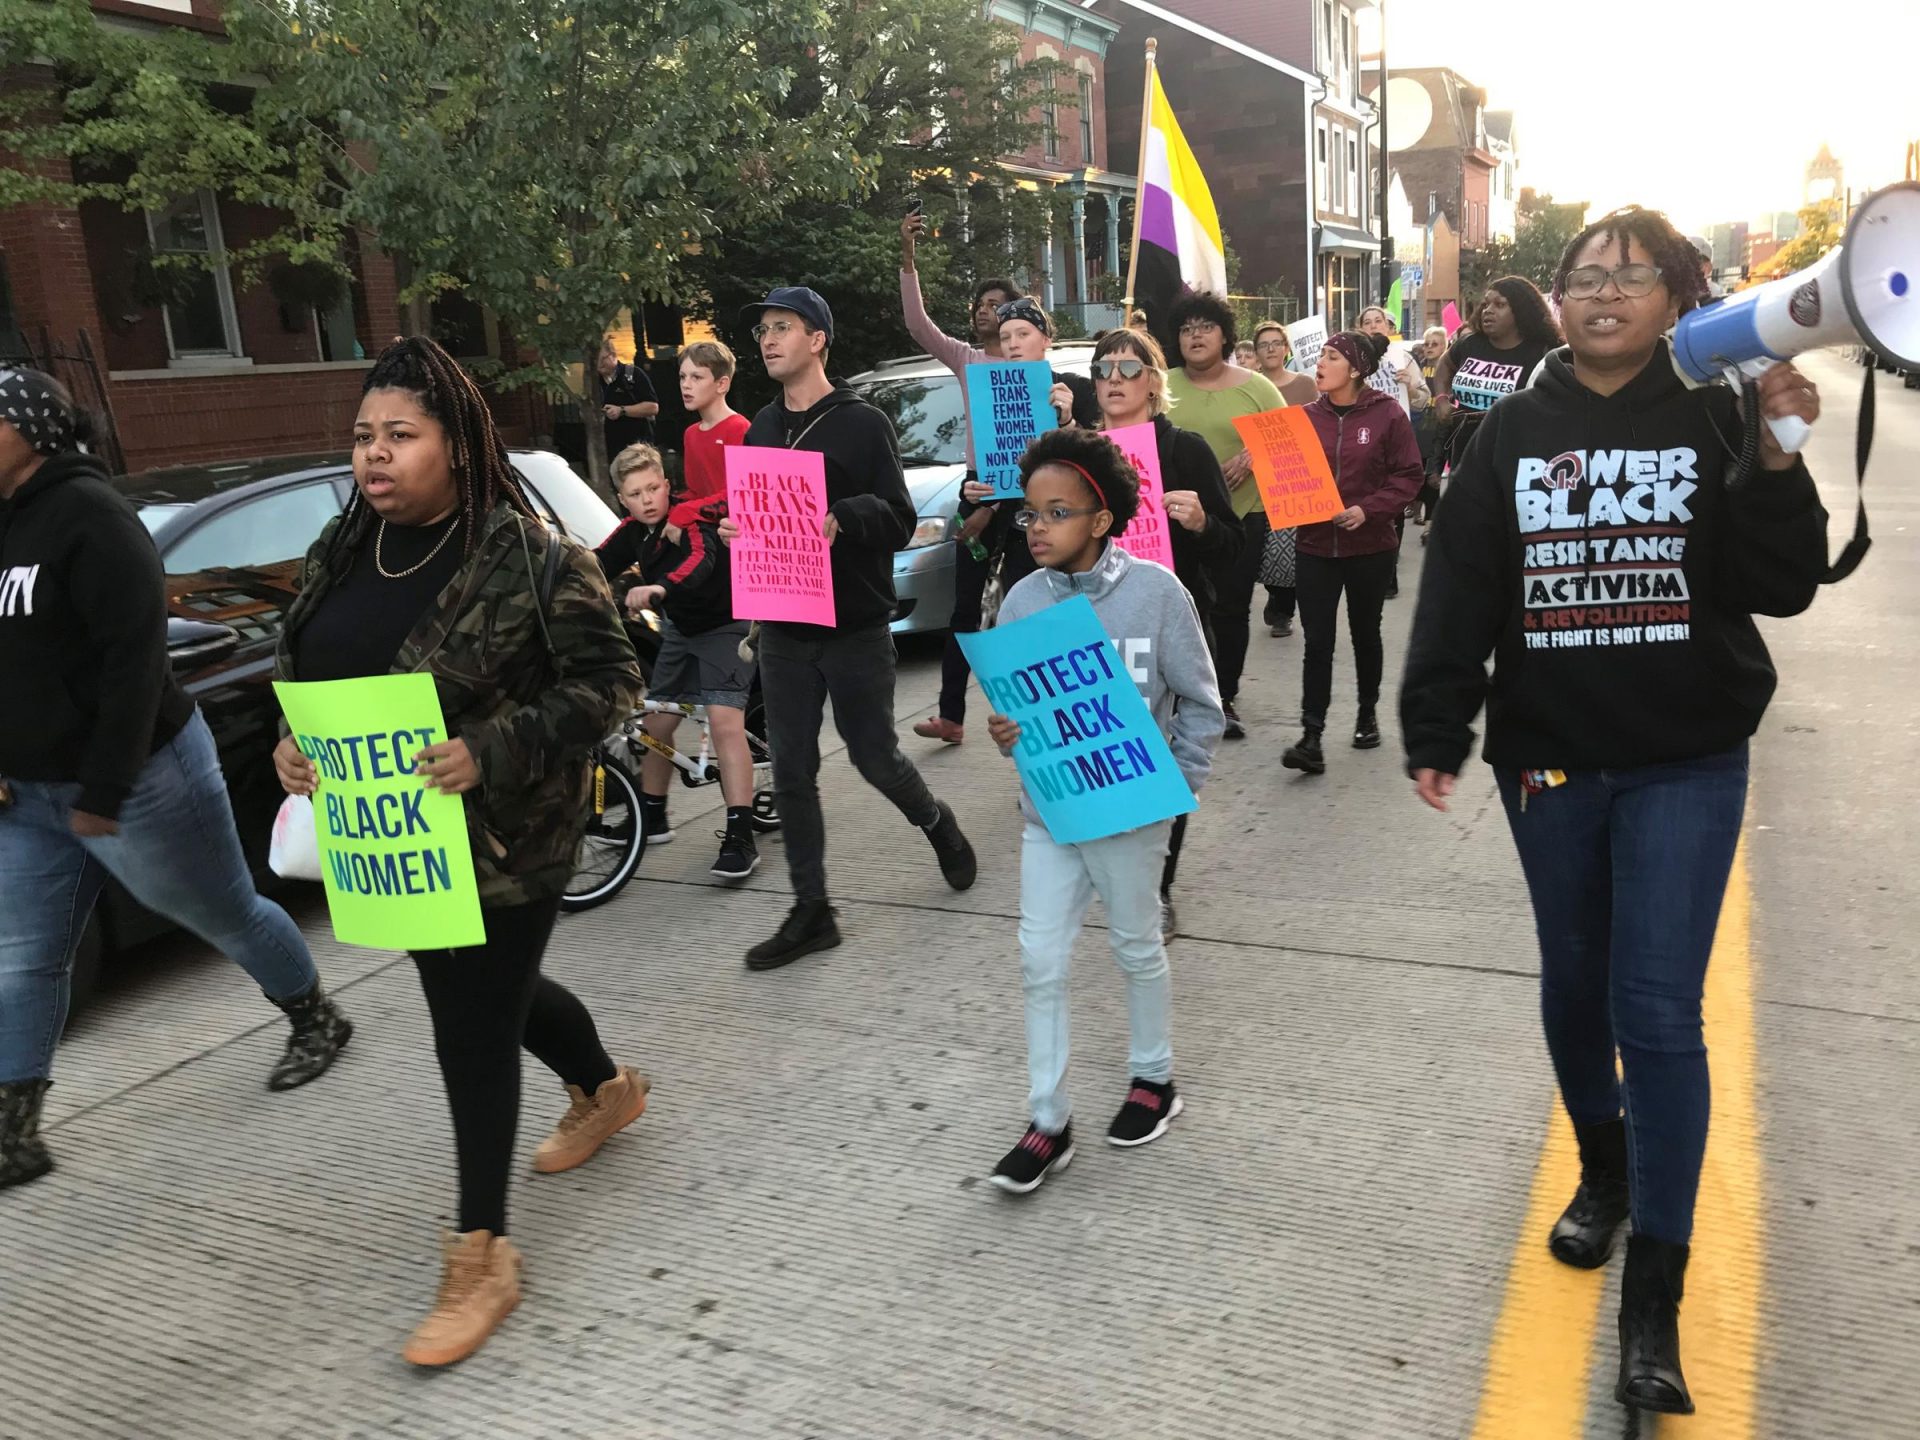 Protesters make their way down Penn Avenue in Pittsburgh as part of the Protect Black Women march on Oct. 4, 2019.